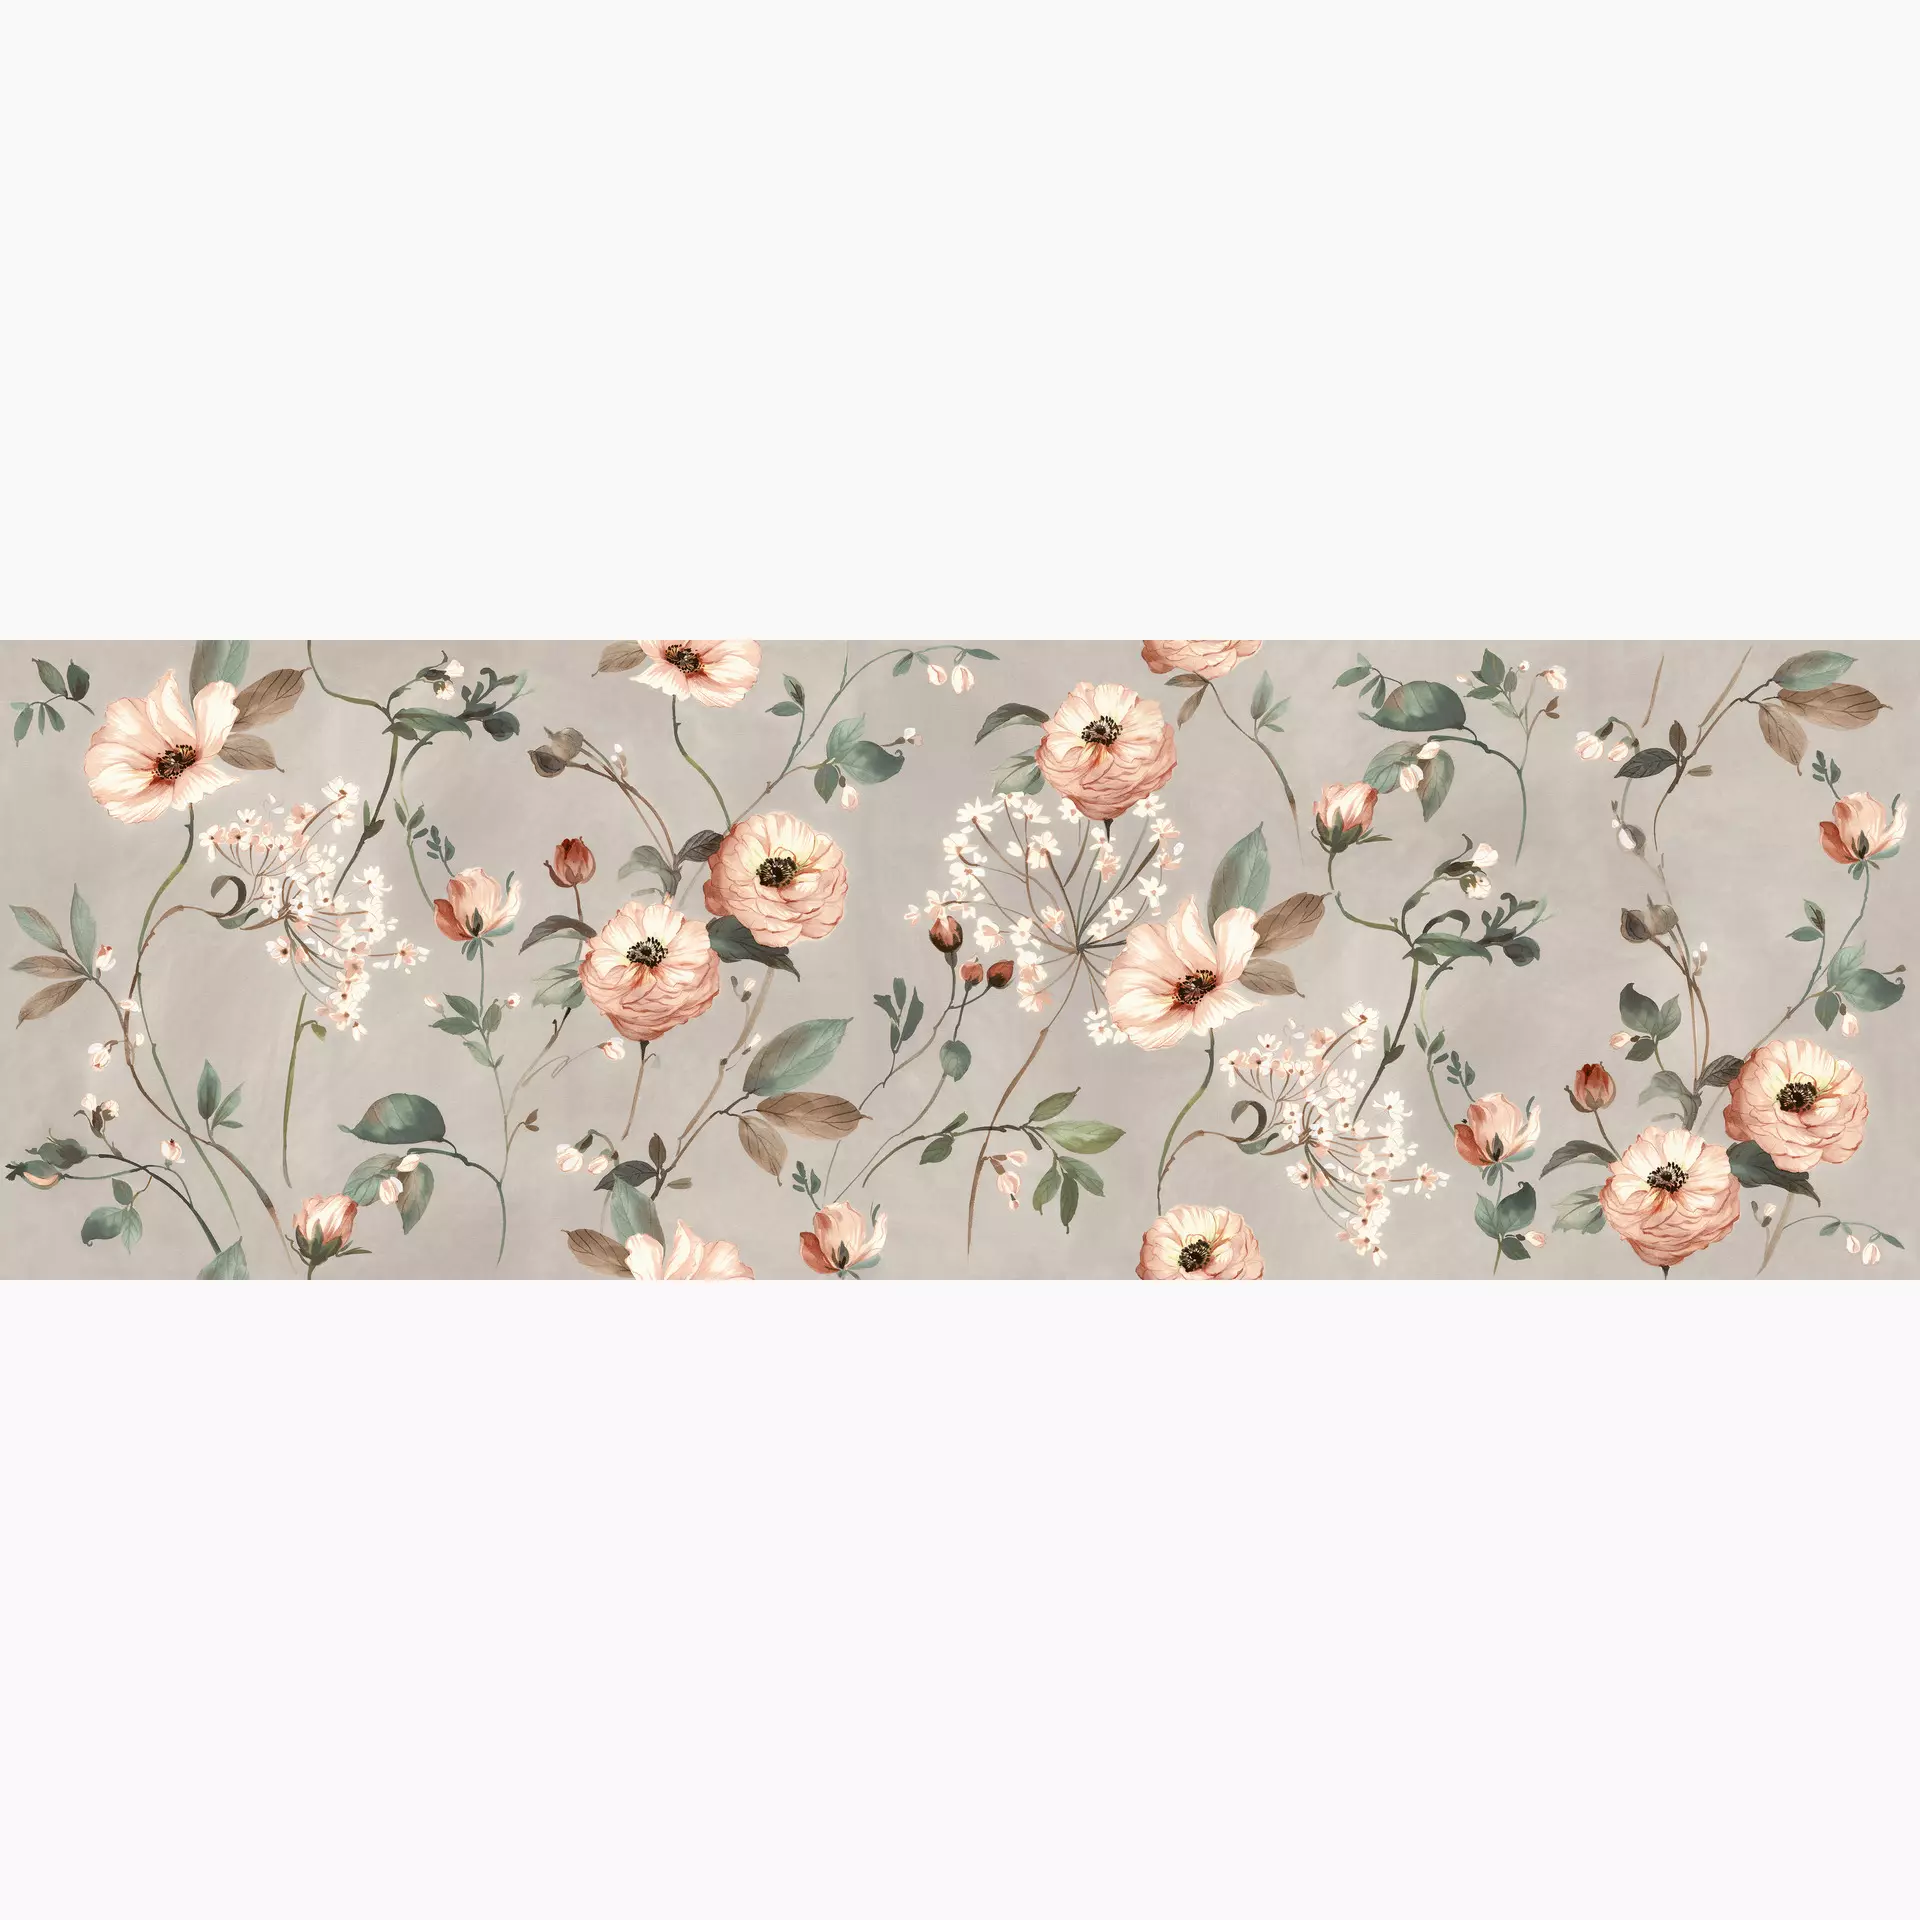 Ragno Papers Pape Dec Bloom Decor Bloom Touch RA9E 60x180cm rectified 7mm